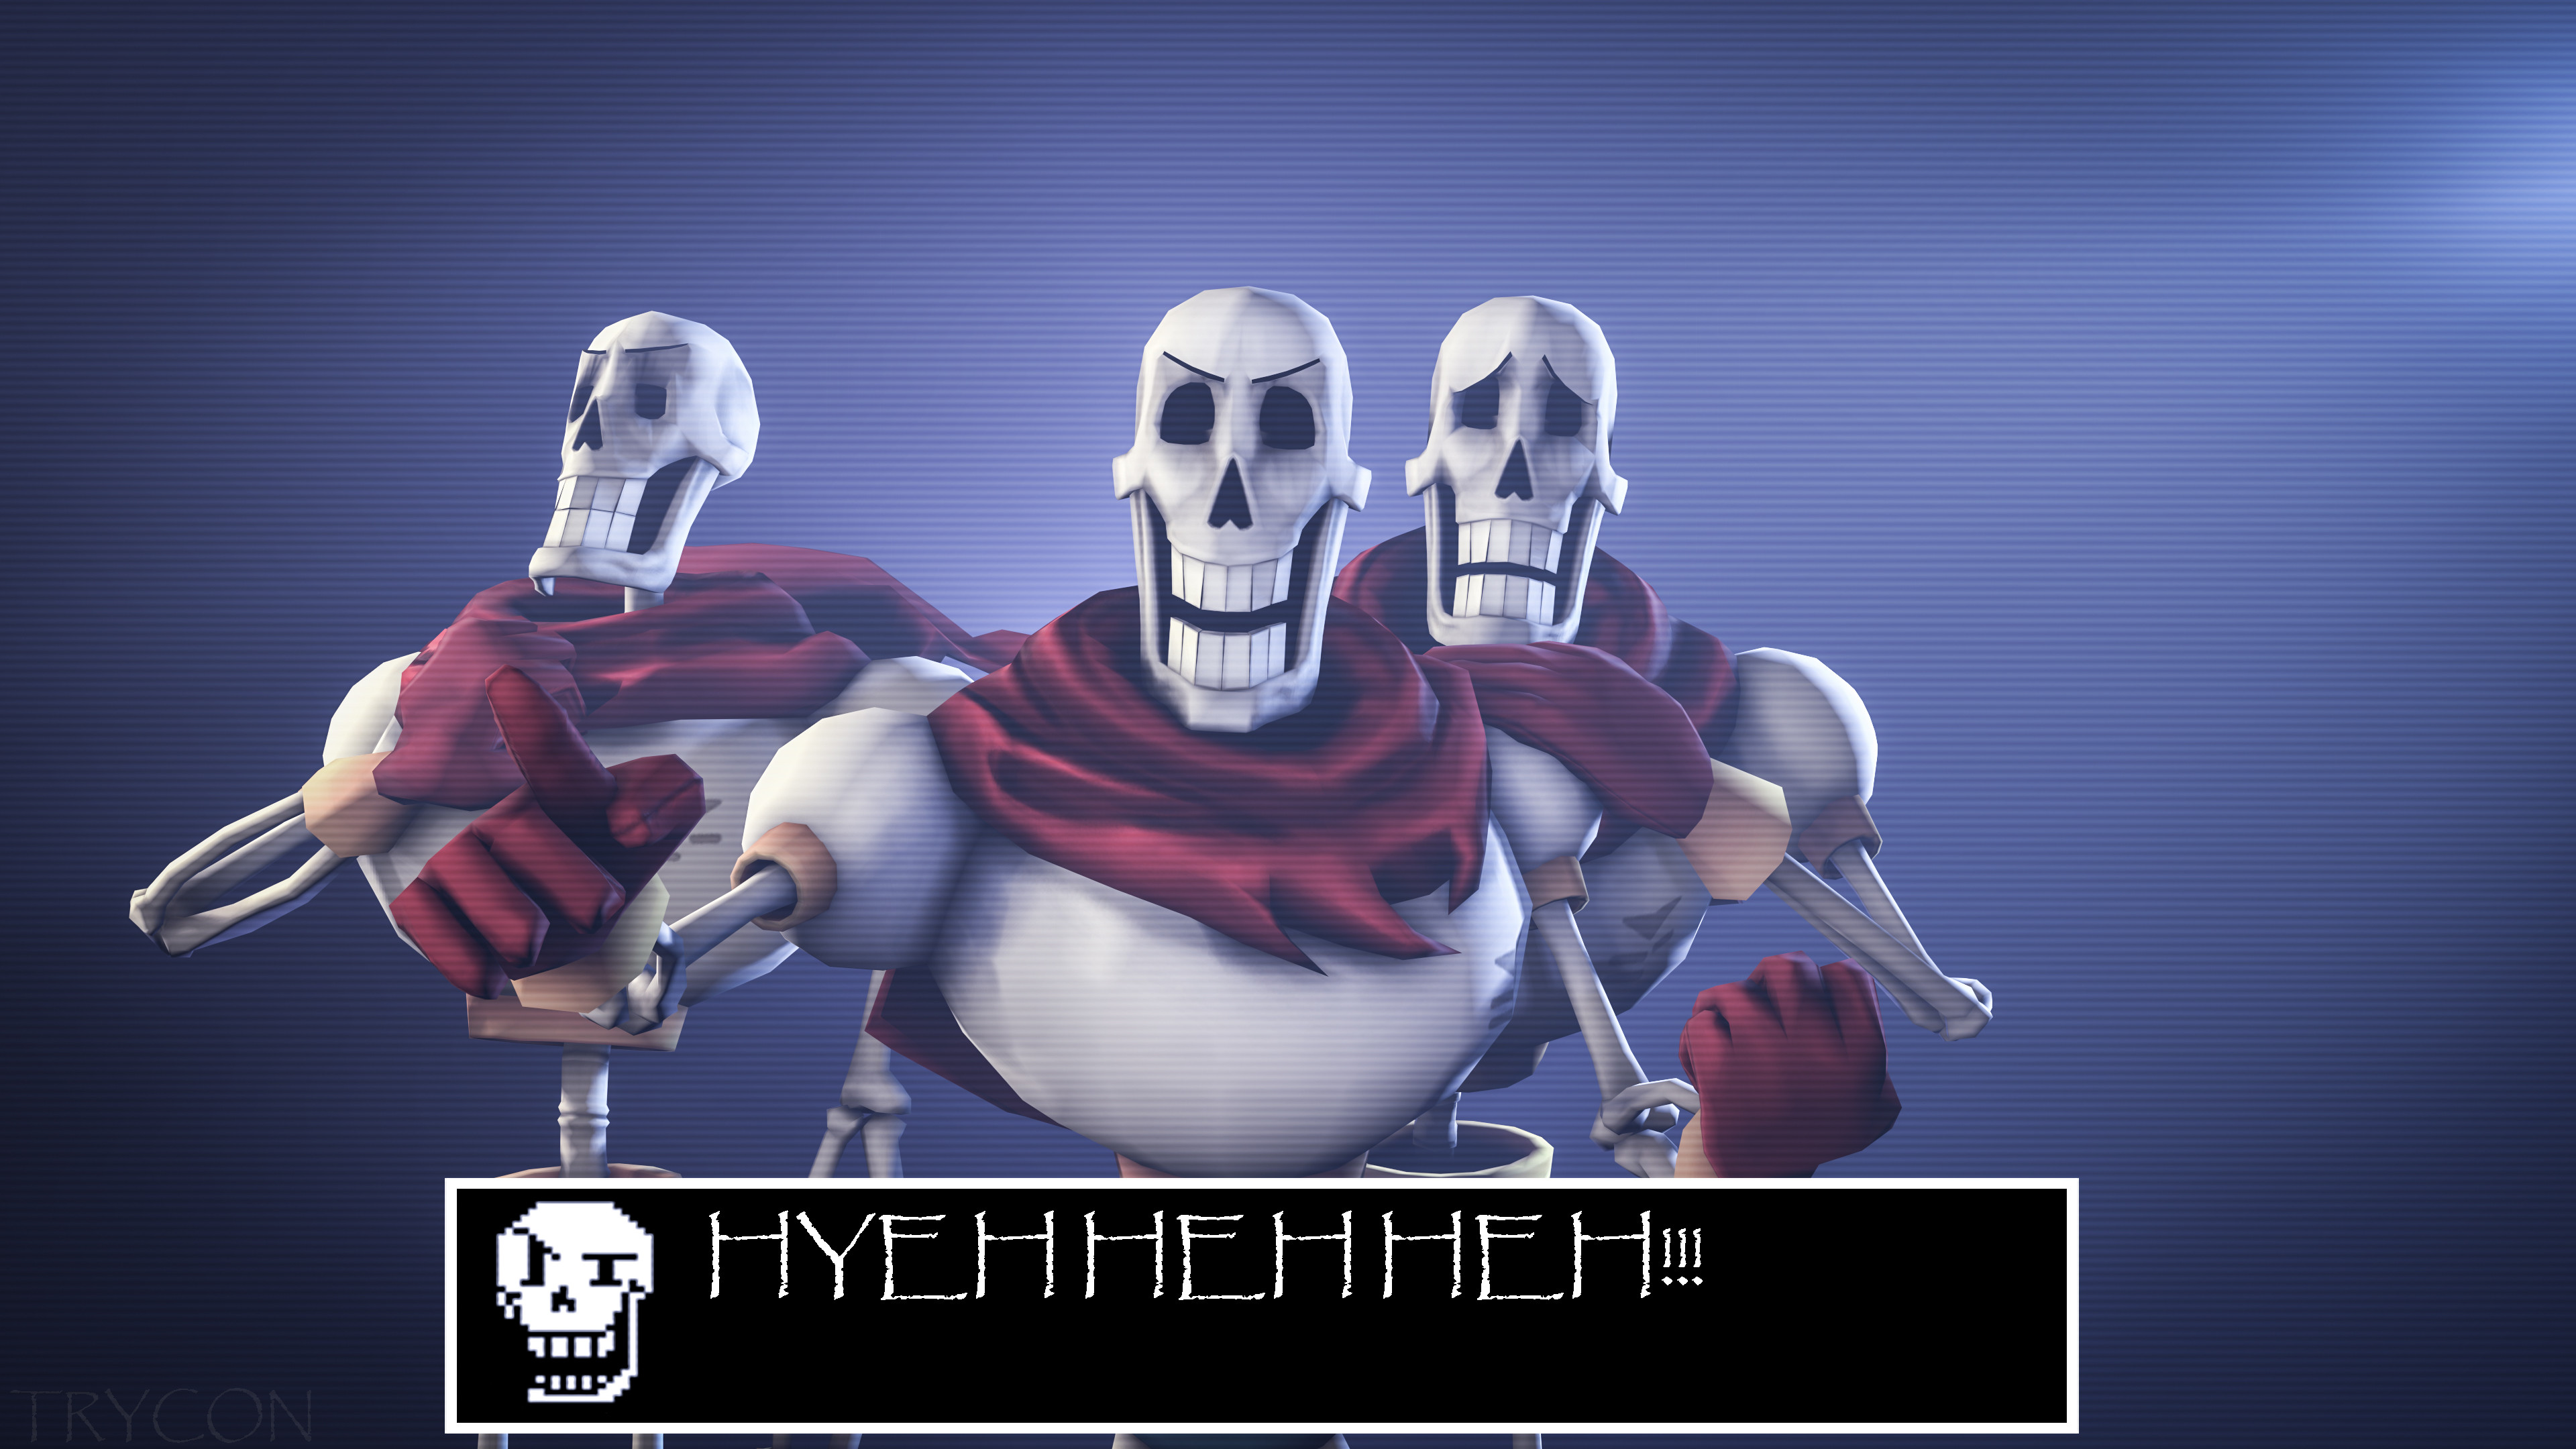 [Undertale] Papyrus by Trycon1980 on DeviantArt